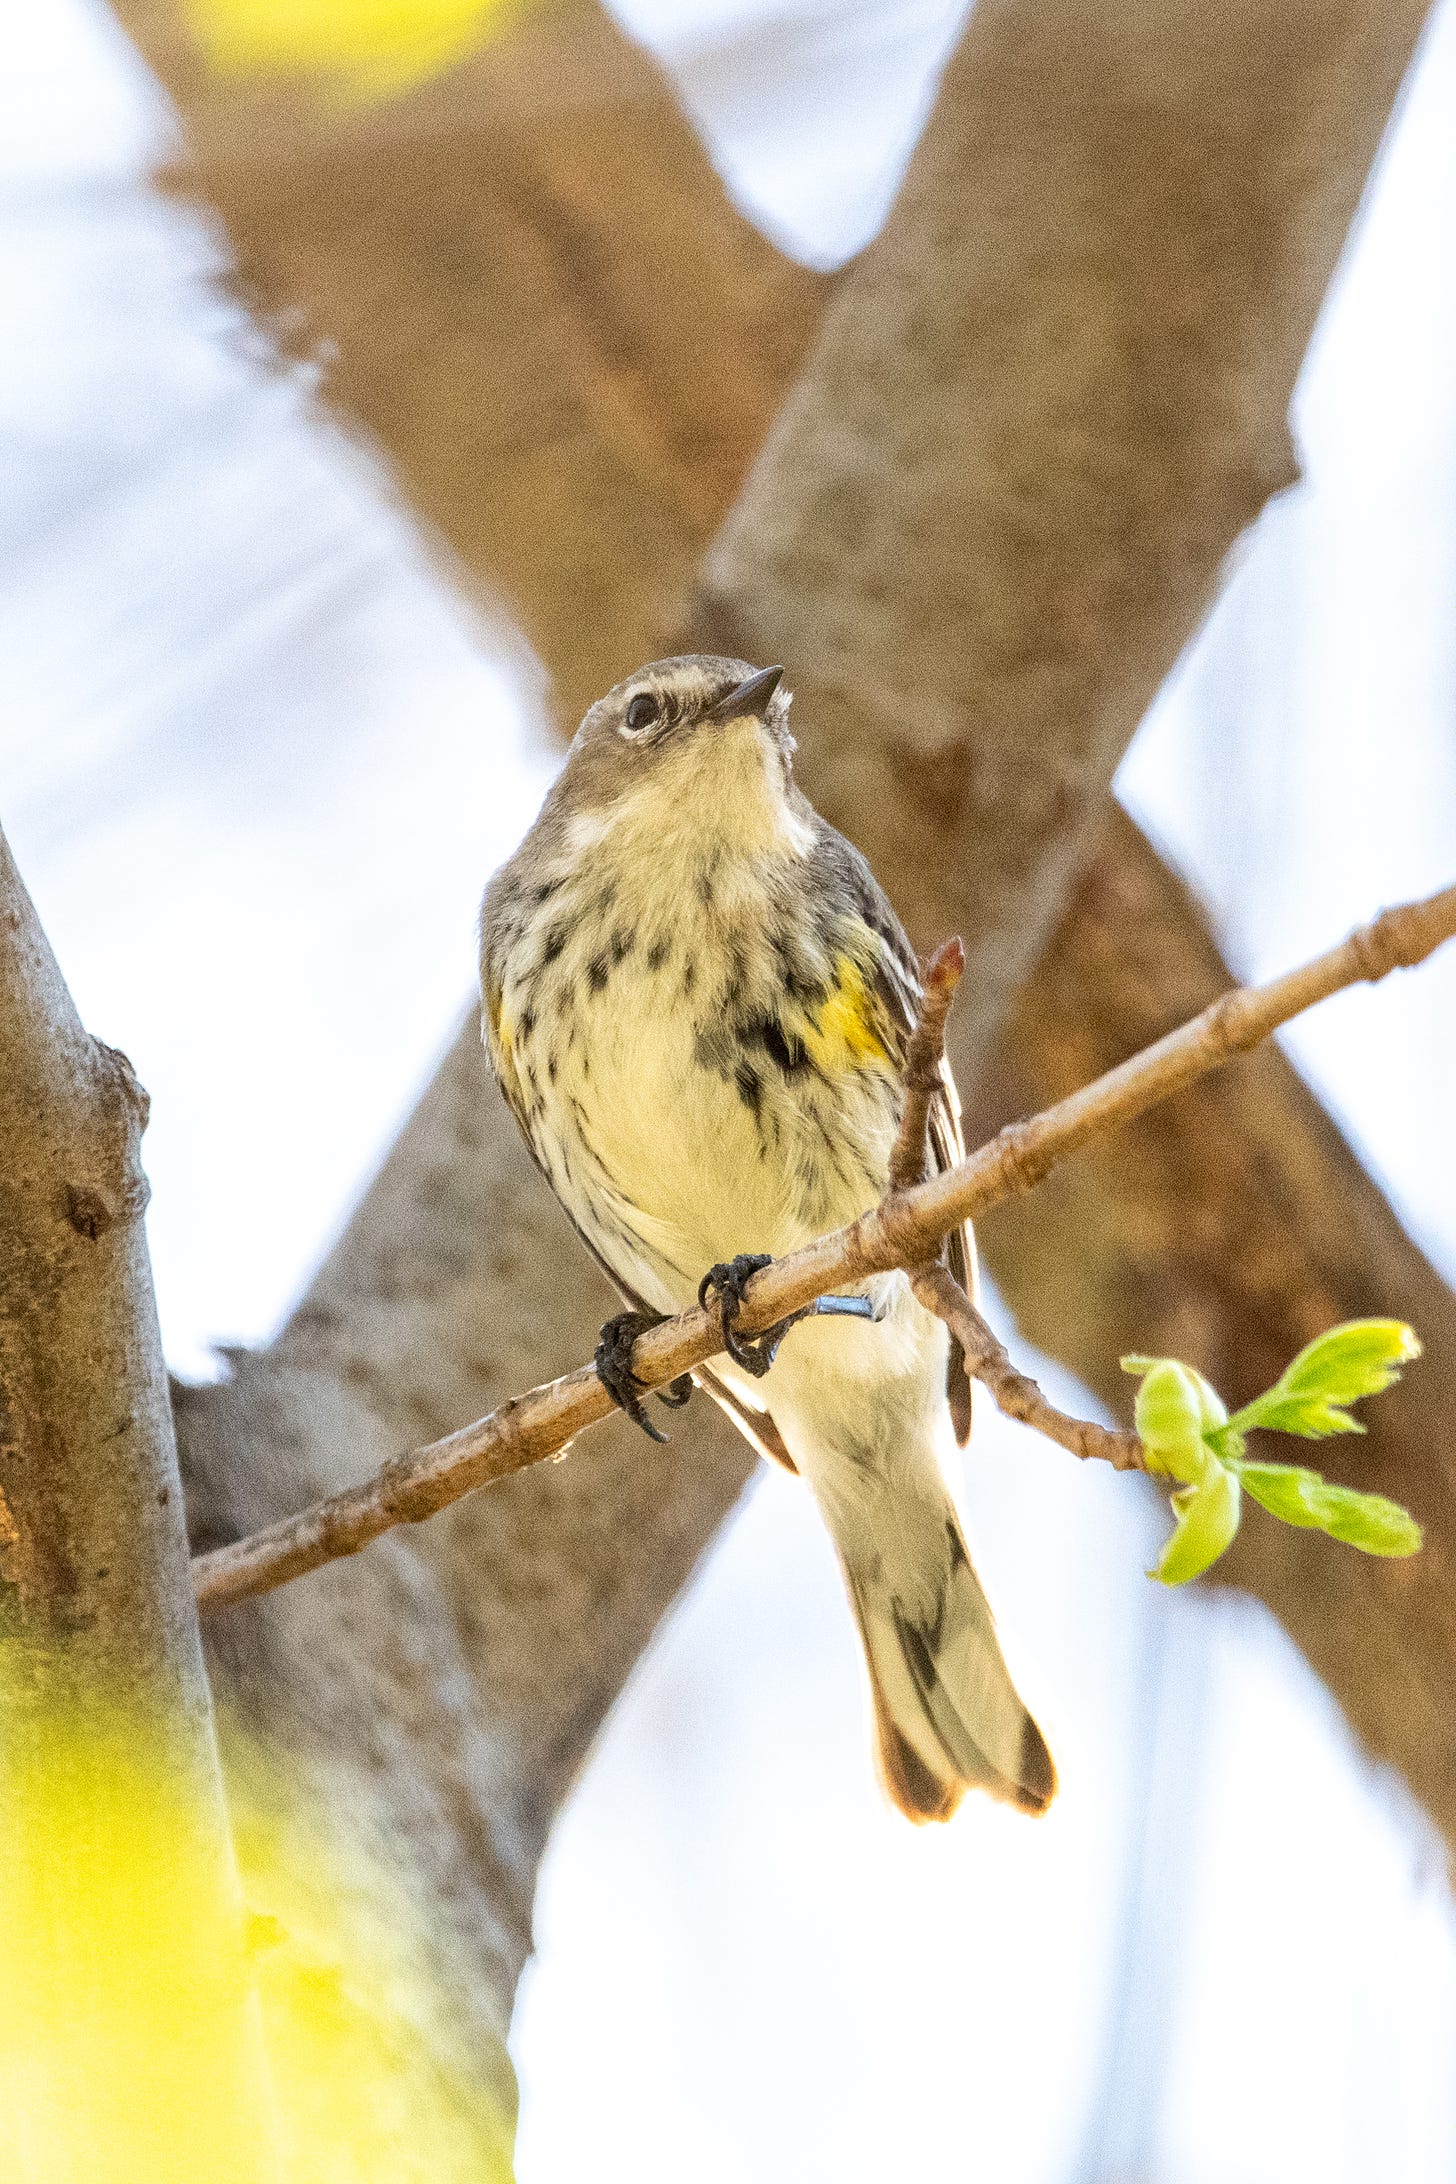 A somewhat muddy-colored yellow-rumped warbler, shoulders hunched, perched in shadow with an X of crossed tree trunks in the background